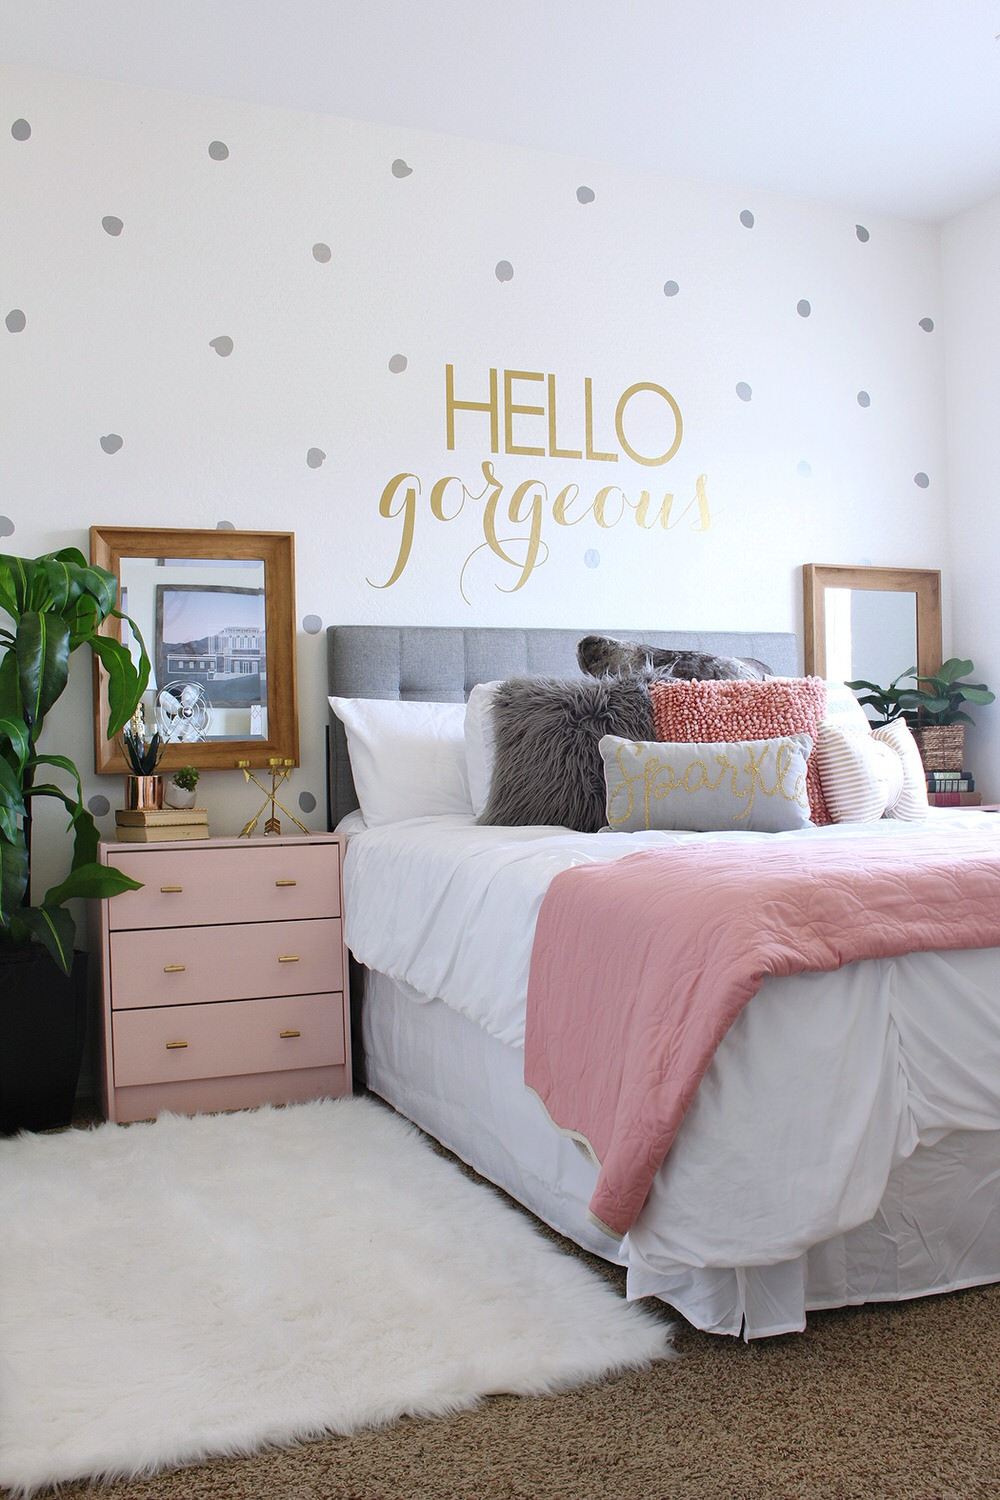 Diy Bedroom Decor It Yourself Teen Bedroom Decorating Tips Tricks &amp; Projects • the Bud